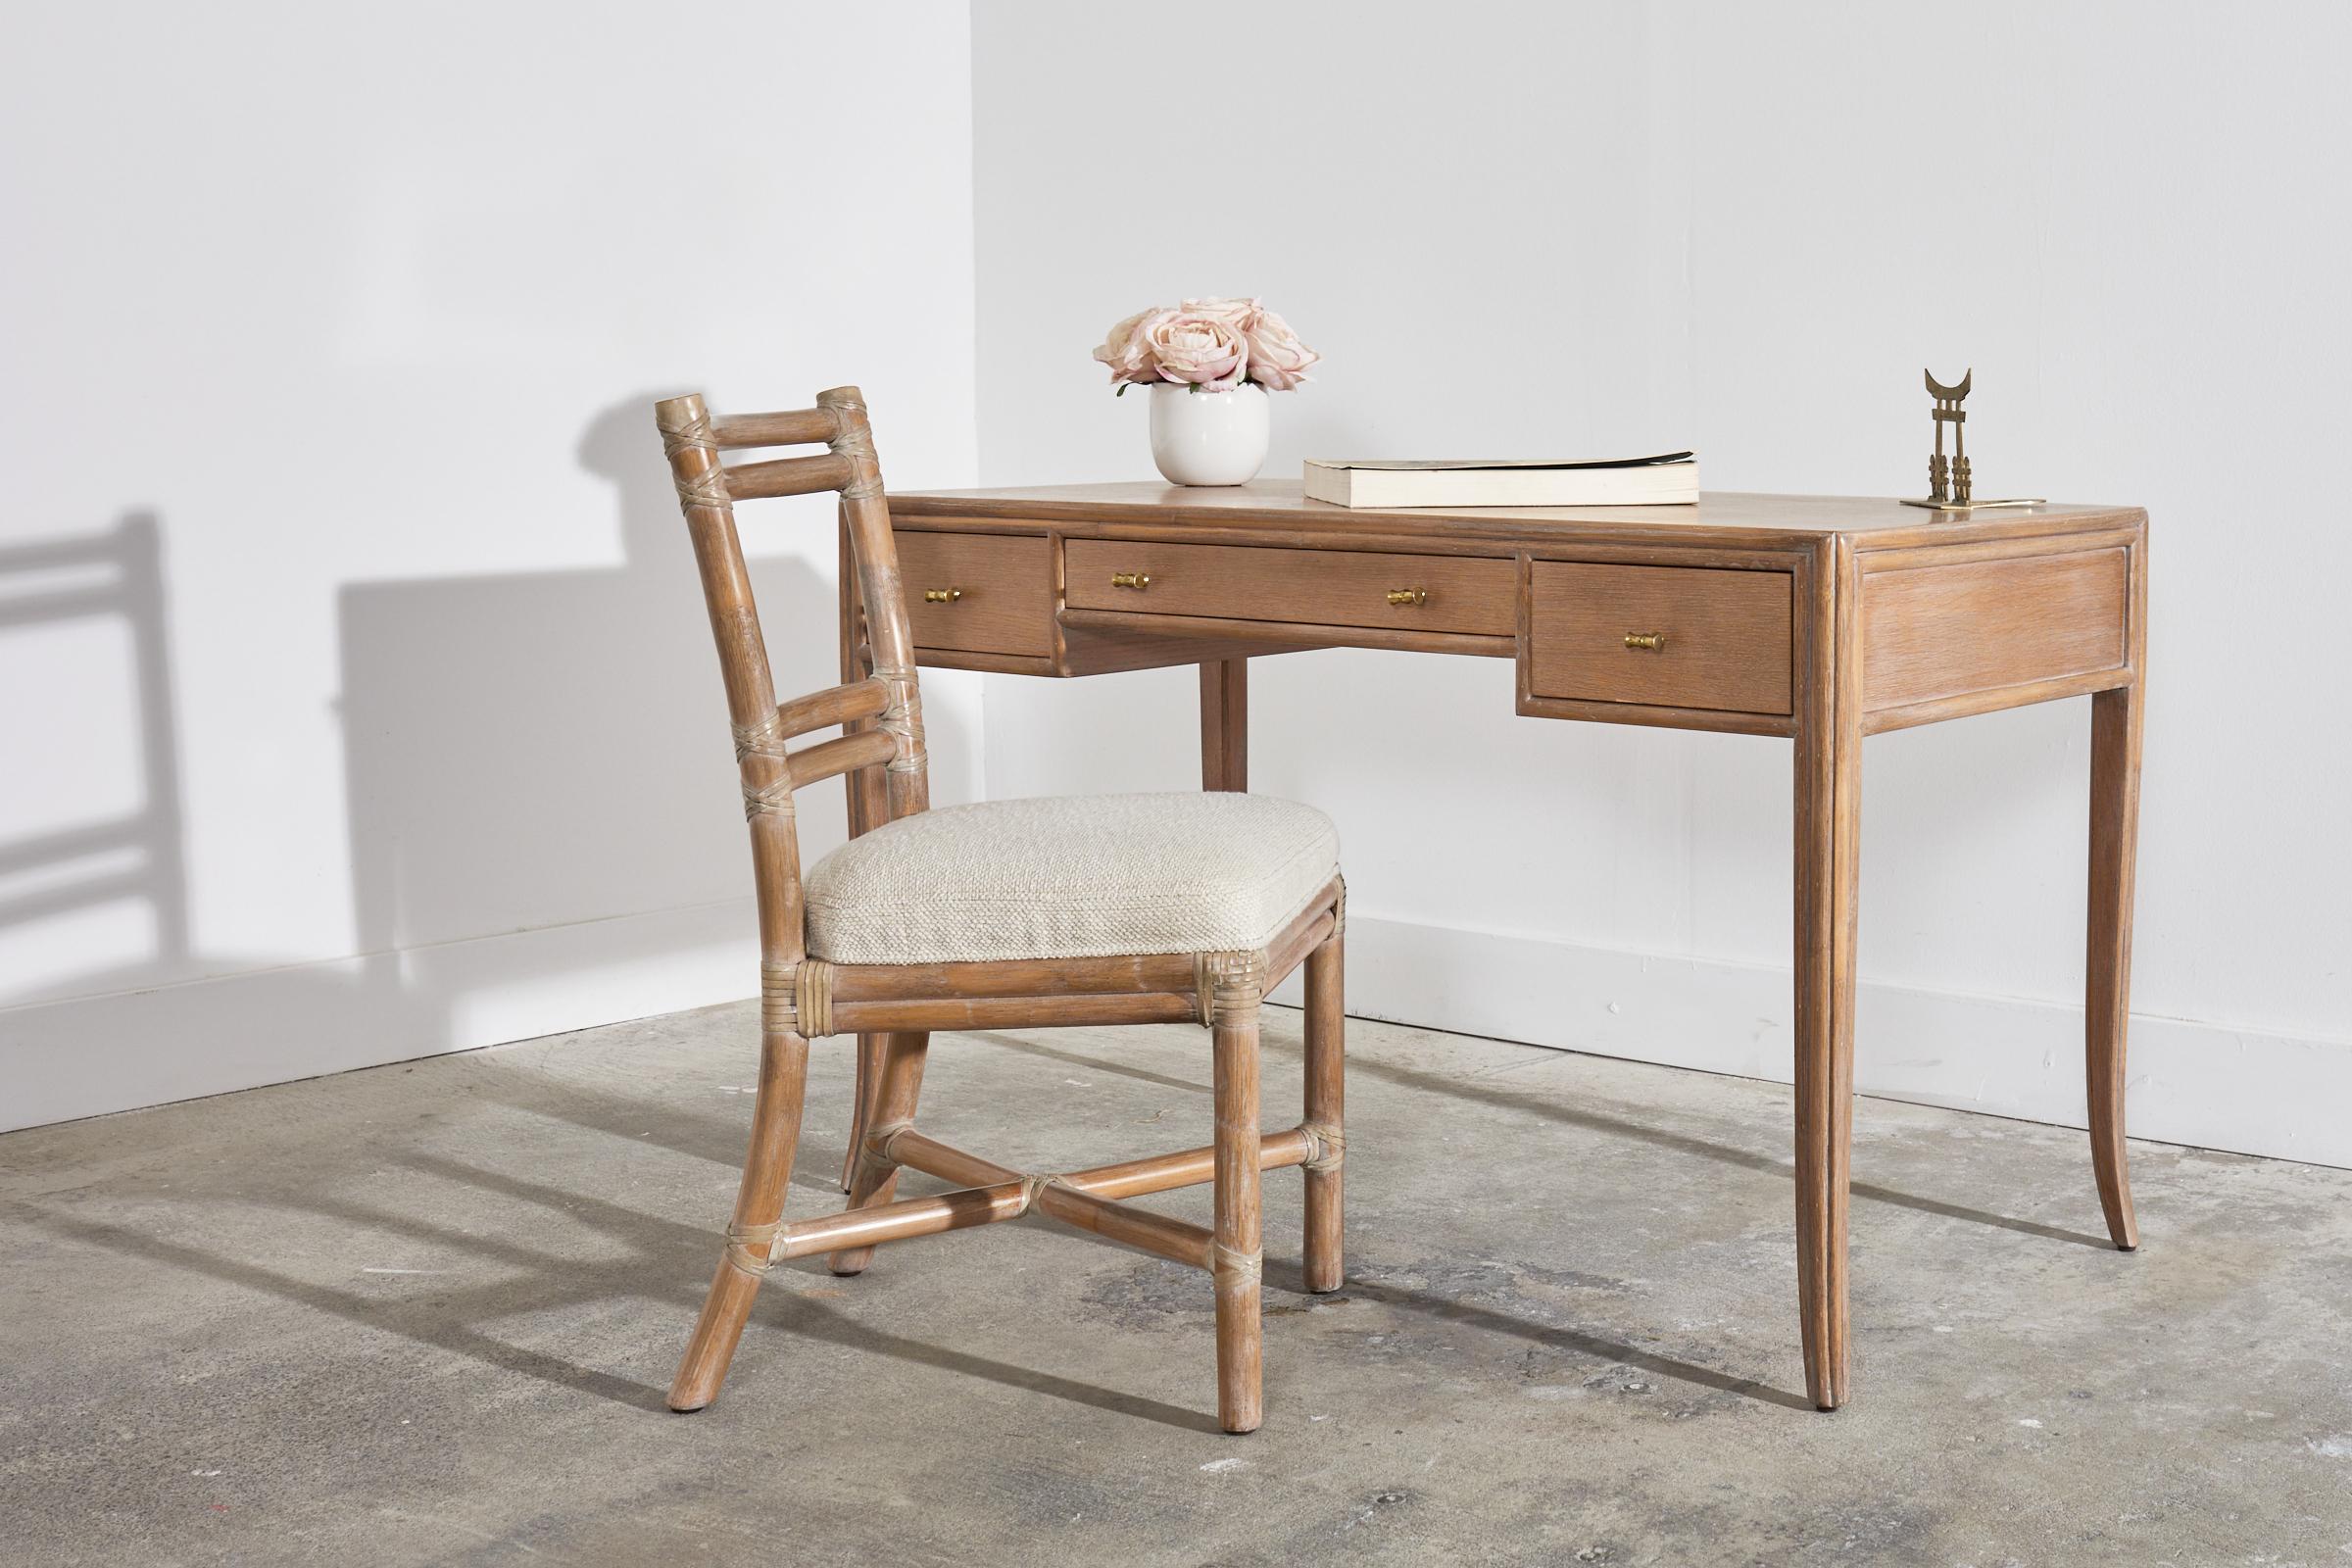 Elegant organic modern writing table or desk designed by Elinor McGuire in the California coastal style. The desk features an oak frame with split rattan accents on the borders giving the design a reeded look. The oak and rattan has a subtle cerused